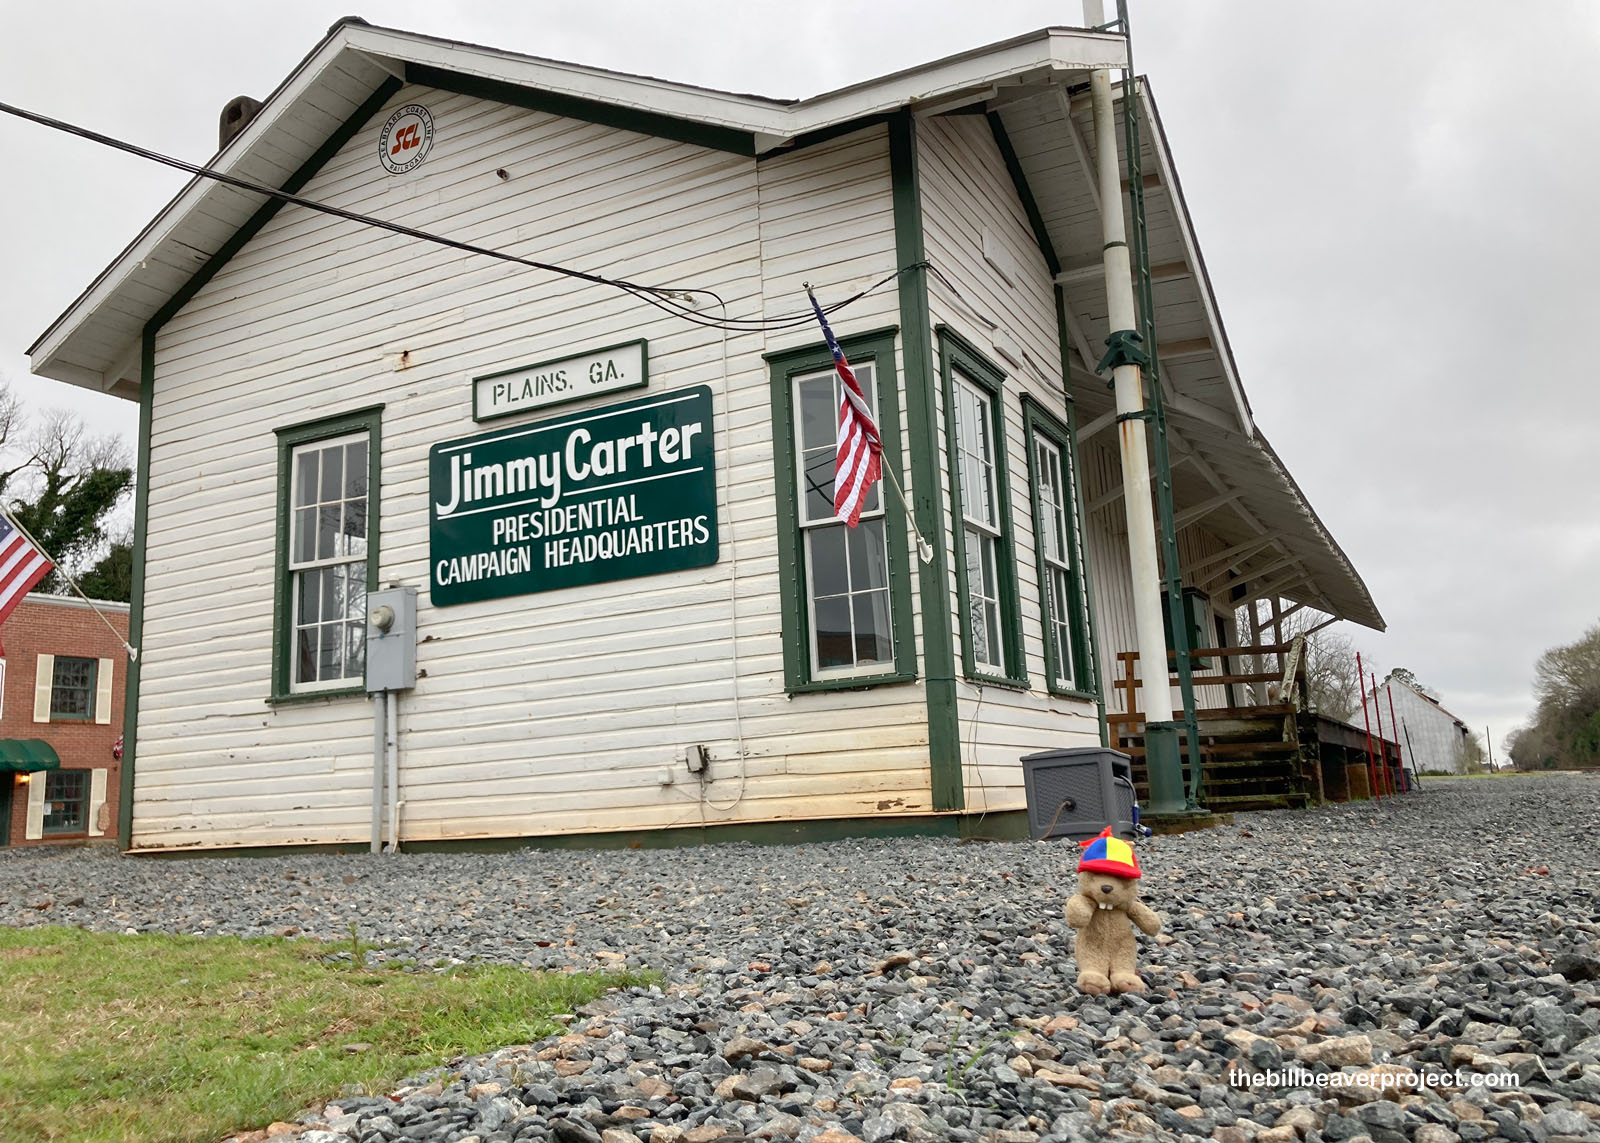 The depot station was Jimmy Carter's campaign headquarters!